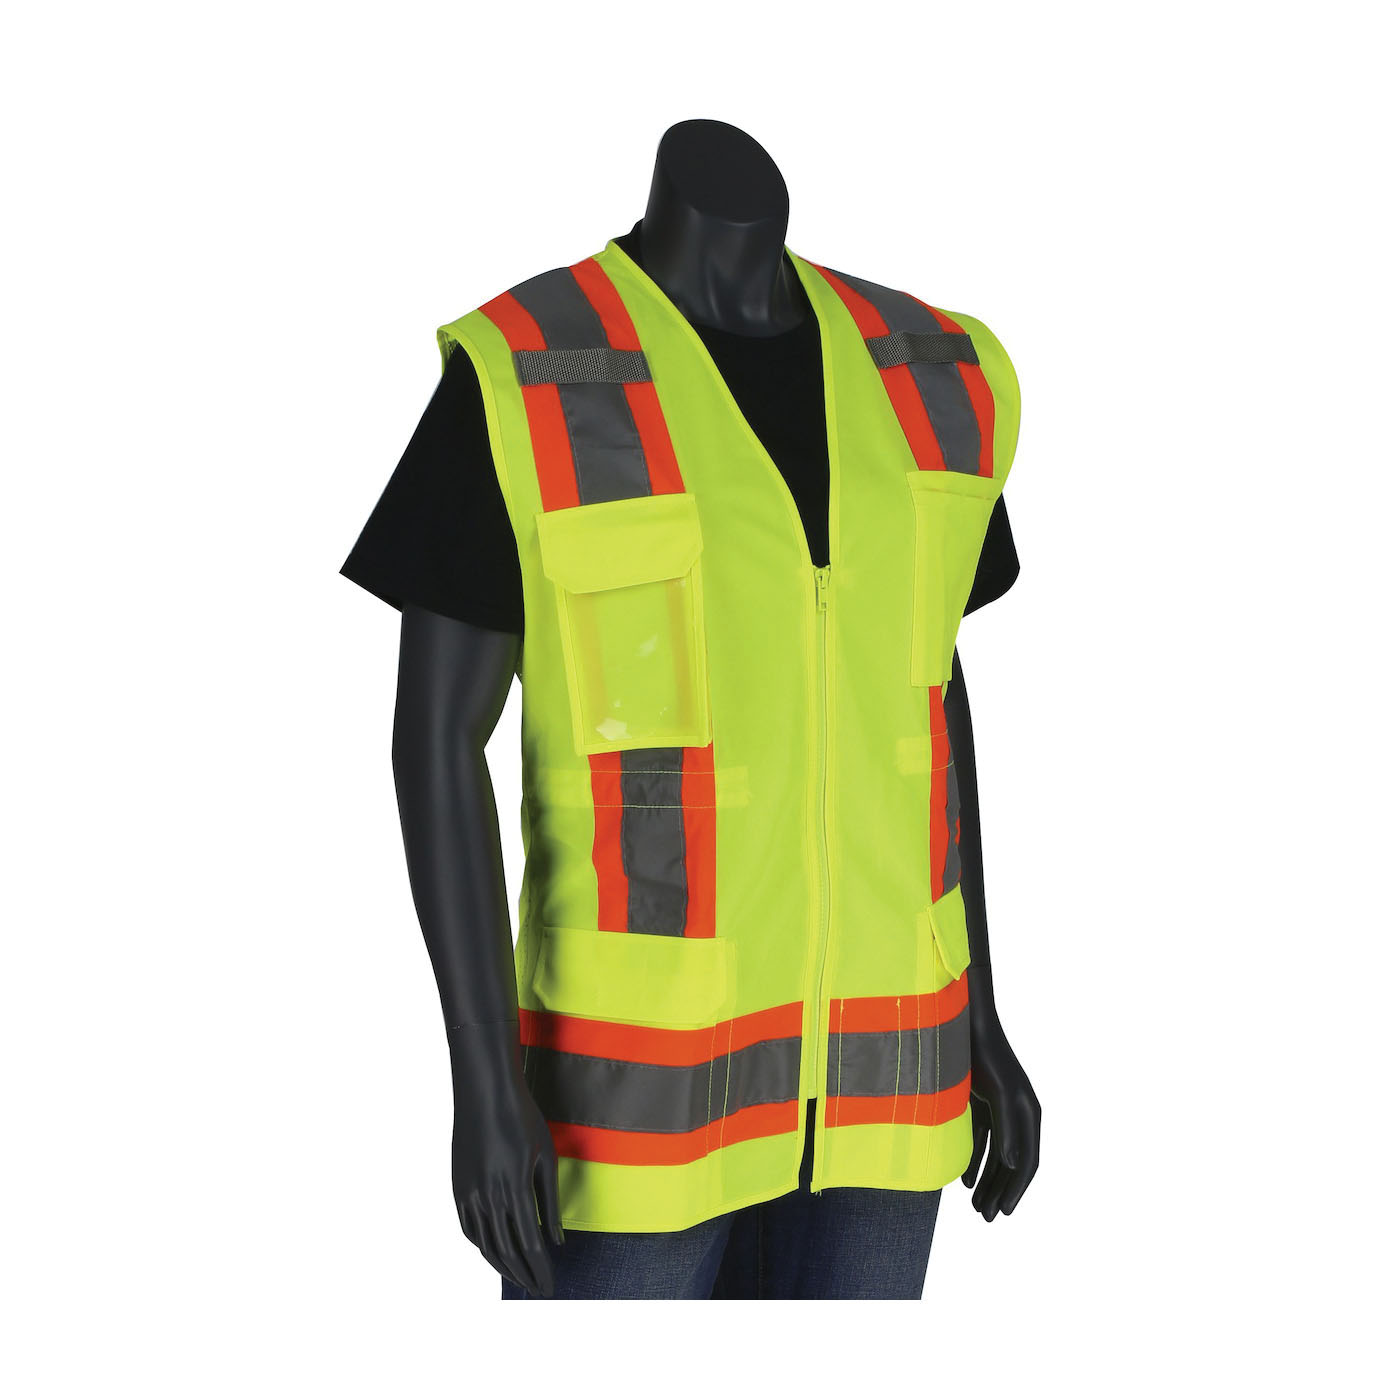 PIP® 302-0512-LY/2X 2-Tone Contoured Surveyor's Vest With Solid Front and Mesh Back, 2XL, Hi-Vis Yellow, 100% Polyester Mesh/Solid Tricot Knit, Zipper Closure, 11 Pockets, ANSI Class: Type/Class R2